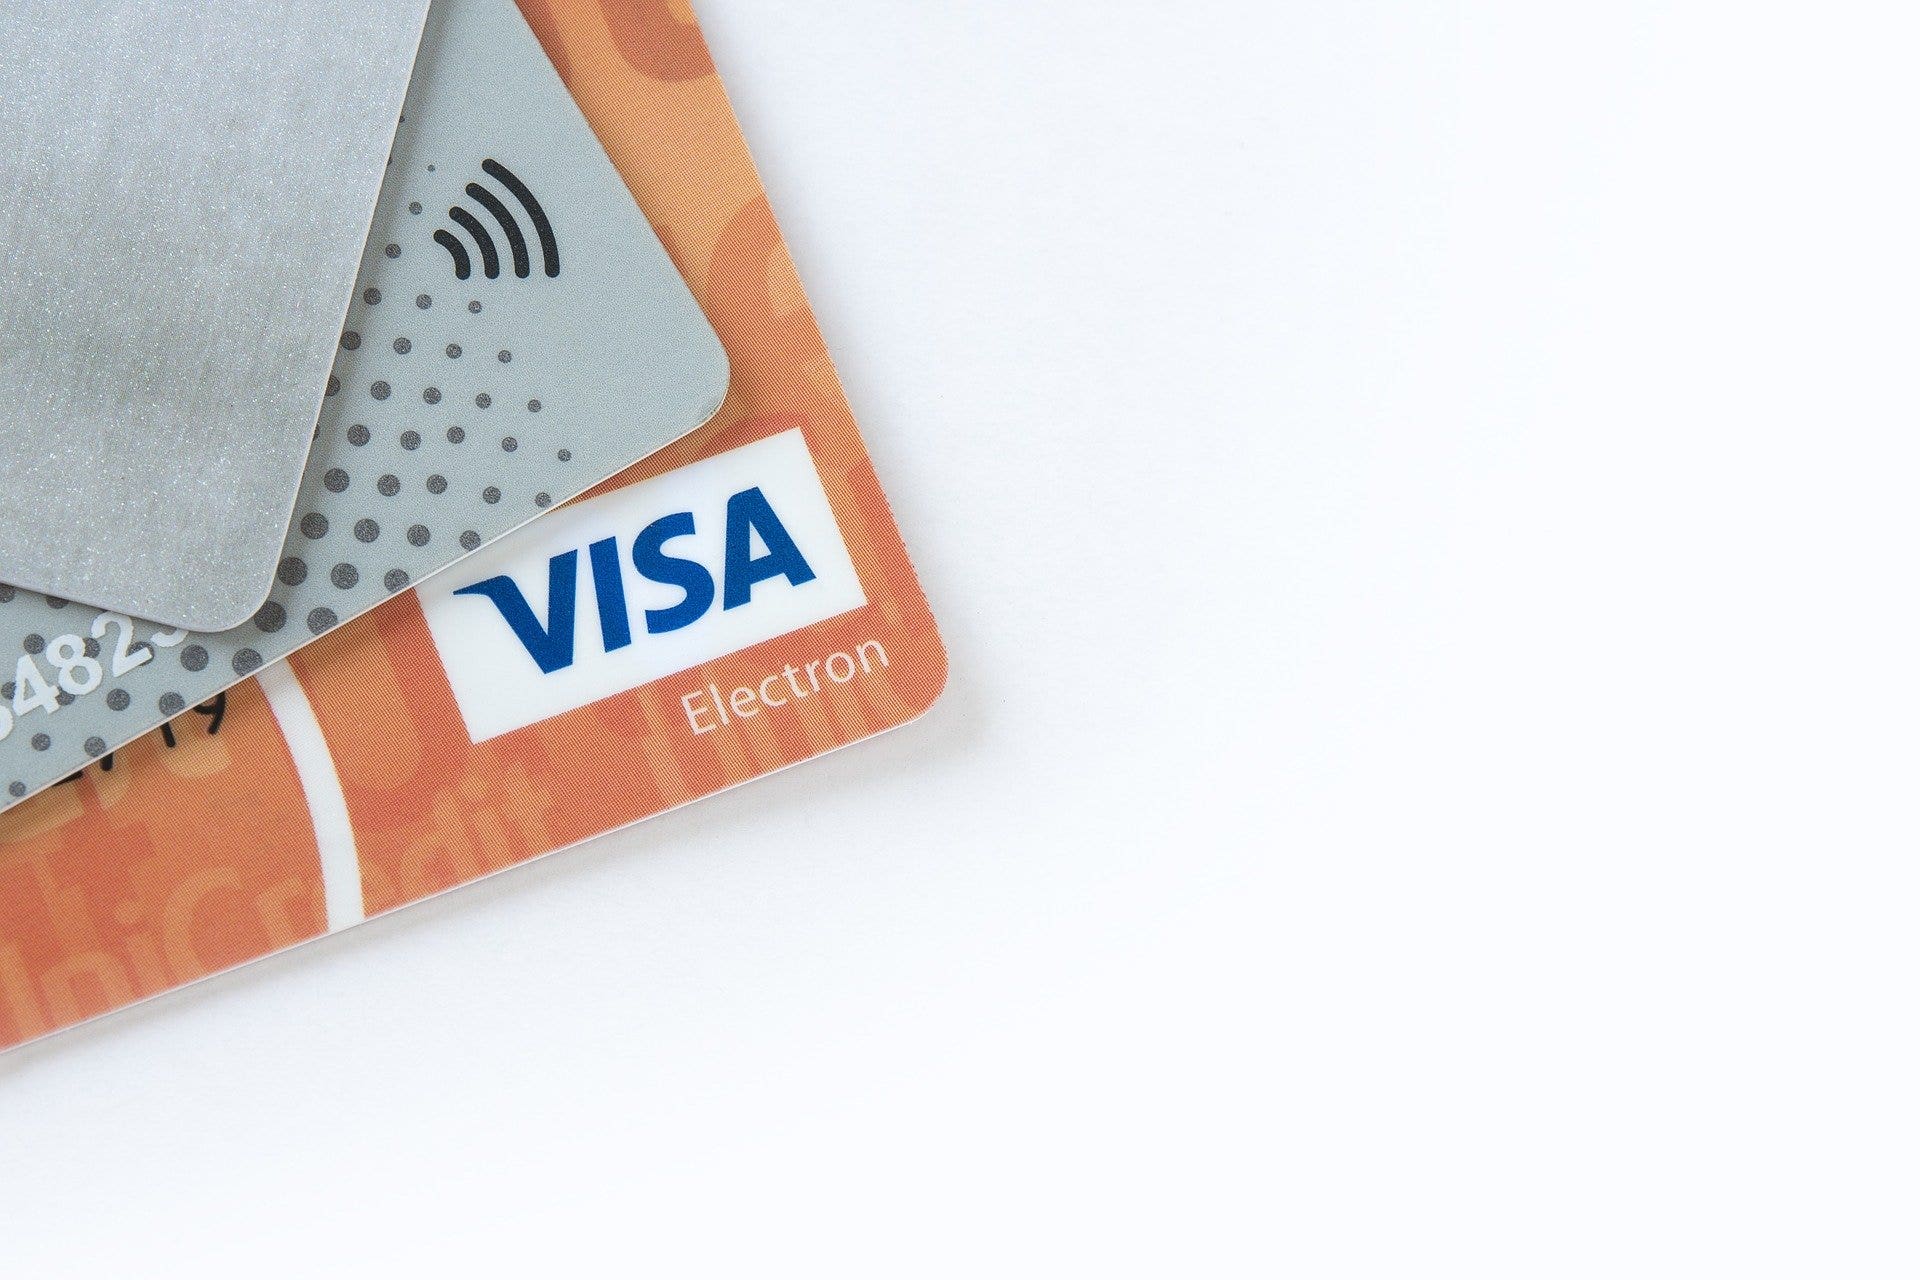 Visa CEO Alfred F. Kelly Jr, Incidental To Its Digital Shift Retires, Names New Chief